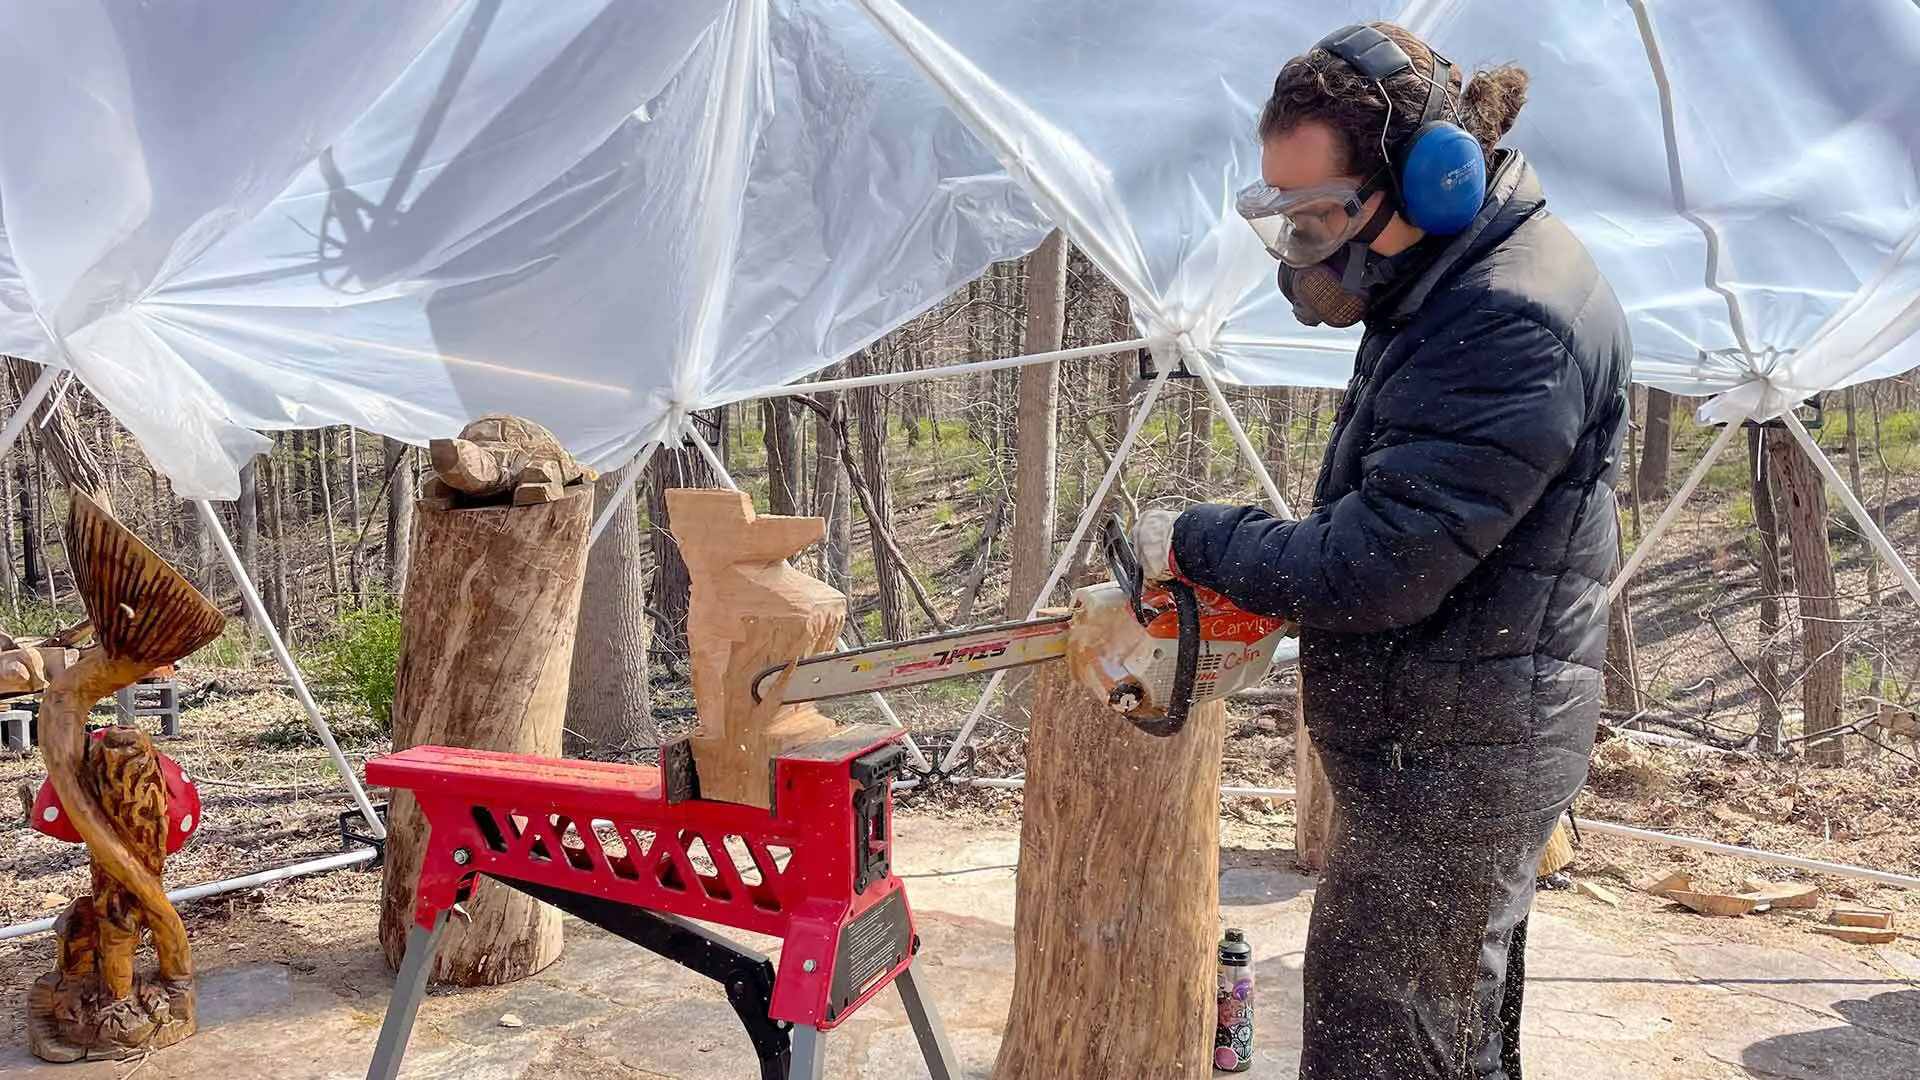 Colin Vale '13 carves a woodpecker with a chainsaw. His giant wood sculptures can be seen across the D.C. metro area, from public parks to private backyards. Photo by Karen Shih '09.